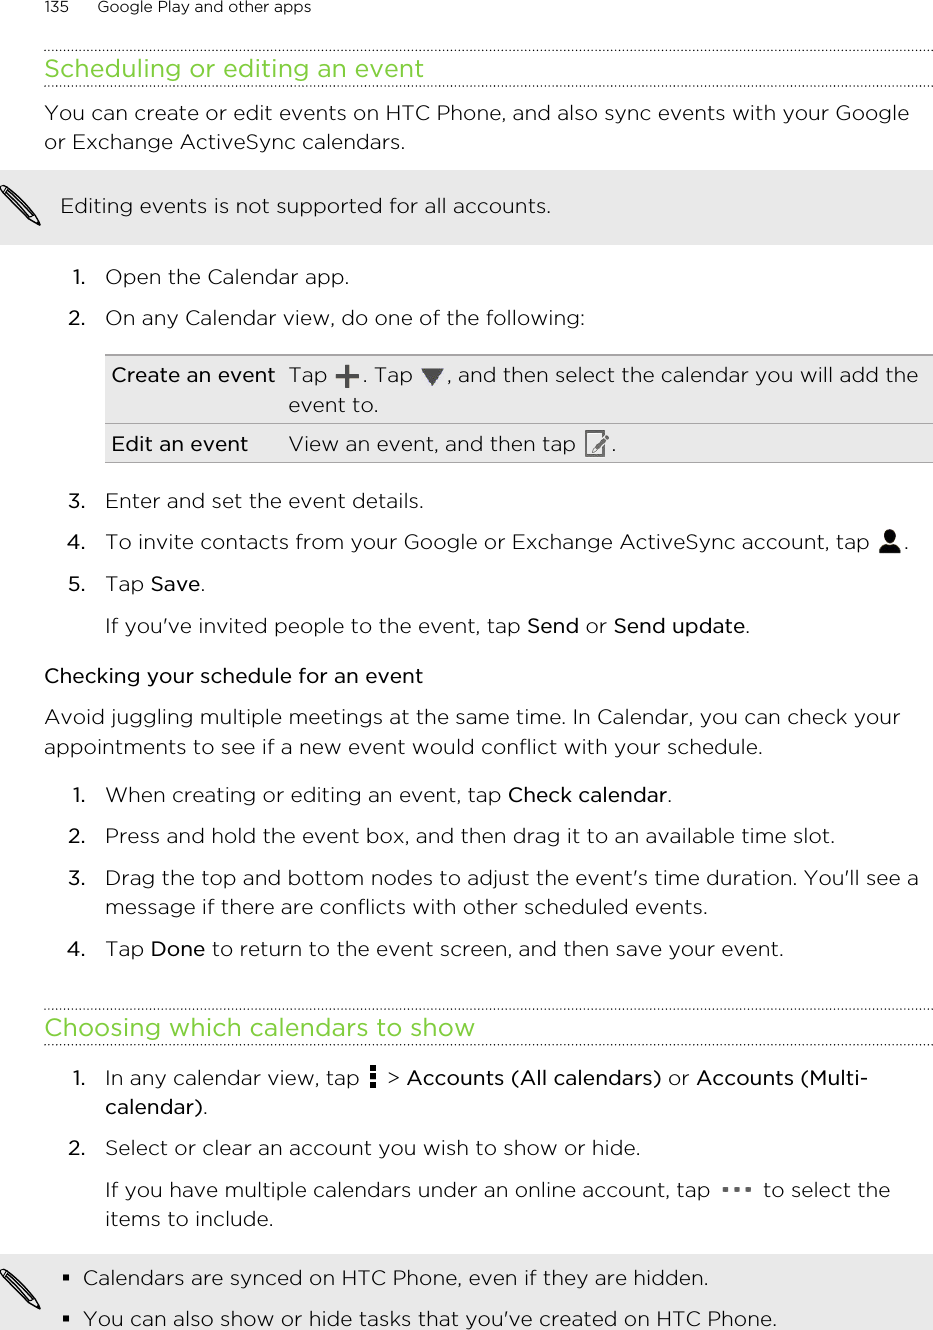 Scheduling or editing an eventYou can create or edit events on HTC Phone, and also sync events with your Googleor Exchange ActiveSync calendars.Editing events is not supported for all accounts.1. Open the Calendar app.2. On any Calendar view, do one of the following:Create an event Tap  . Tap  , and then select the calendar you will add theevent to.Edit an event View an event, and then tap  .3. Enter and set the event details.4. To invite contacts from your Google or Exchange ActiveSync account, tap  .5. Tap Save. If you&apos;ve invited people to the event, tap Send or Send update.Checking your schedule for an eventAvoid juggling multiple meetings at the same time. In Calendar, you can check yourappointments to see if a new event would conflict with your schedule.1. When creating or editing an event, tap Check calendar.2. Press and hold the event box, and then drag it to an available time slot.3. Drag the top and bottom nodes to adjust the event&apos;s time duration. You&apos;ll see amessage if there are conflicts with other scheduled events.4. Tap Done to return to the event screen, and then save your event.Choosing which calendars to show1. In any calendar view, tap   &gt; Accounts (All calendars) or Accounts (Multi-calendar).2. Select or clear an account you wish to show or hide. If you have multiple calendars under an online account, tap   to select theitems to include.§Calendars are synced on HTC Phone, even if they are hidden.§You can also show or hide tasks that you&apos;ve created on HTC Phone.135 Google Play and other appsHTC Confidential for Certification HTC Confidential for Certification